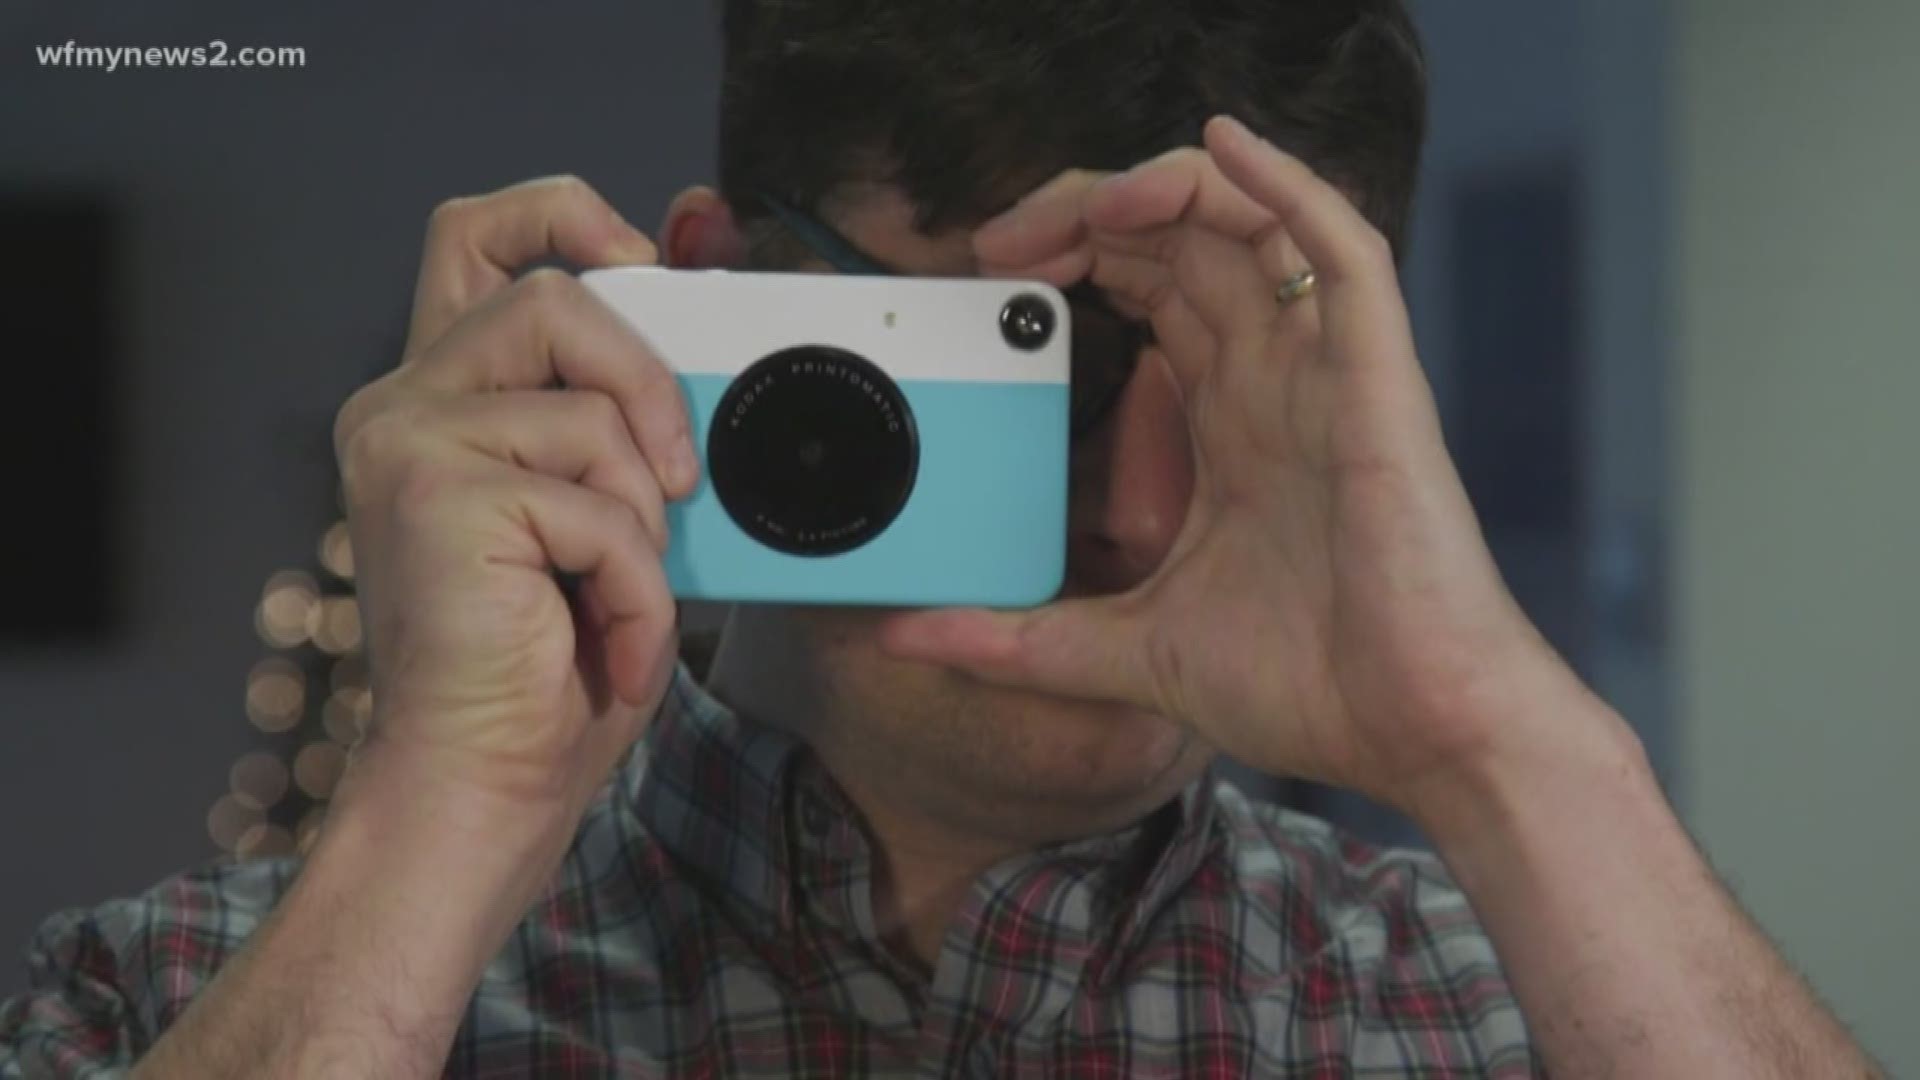 Consumer Reports has a guide on their highest-rated instant cameras. We'll show you how to use them.